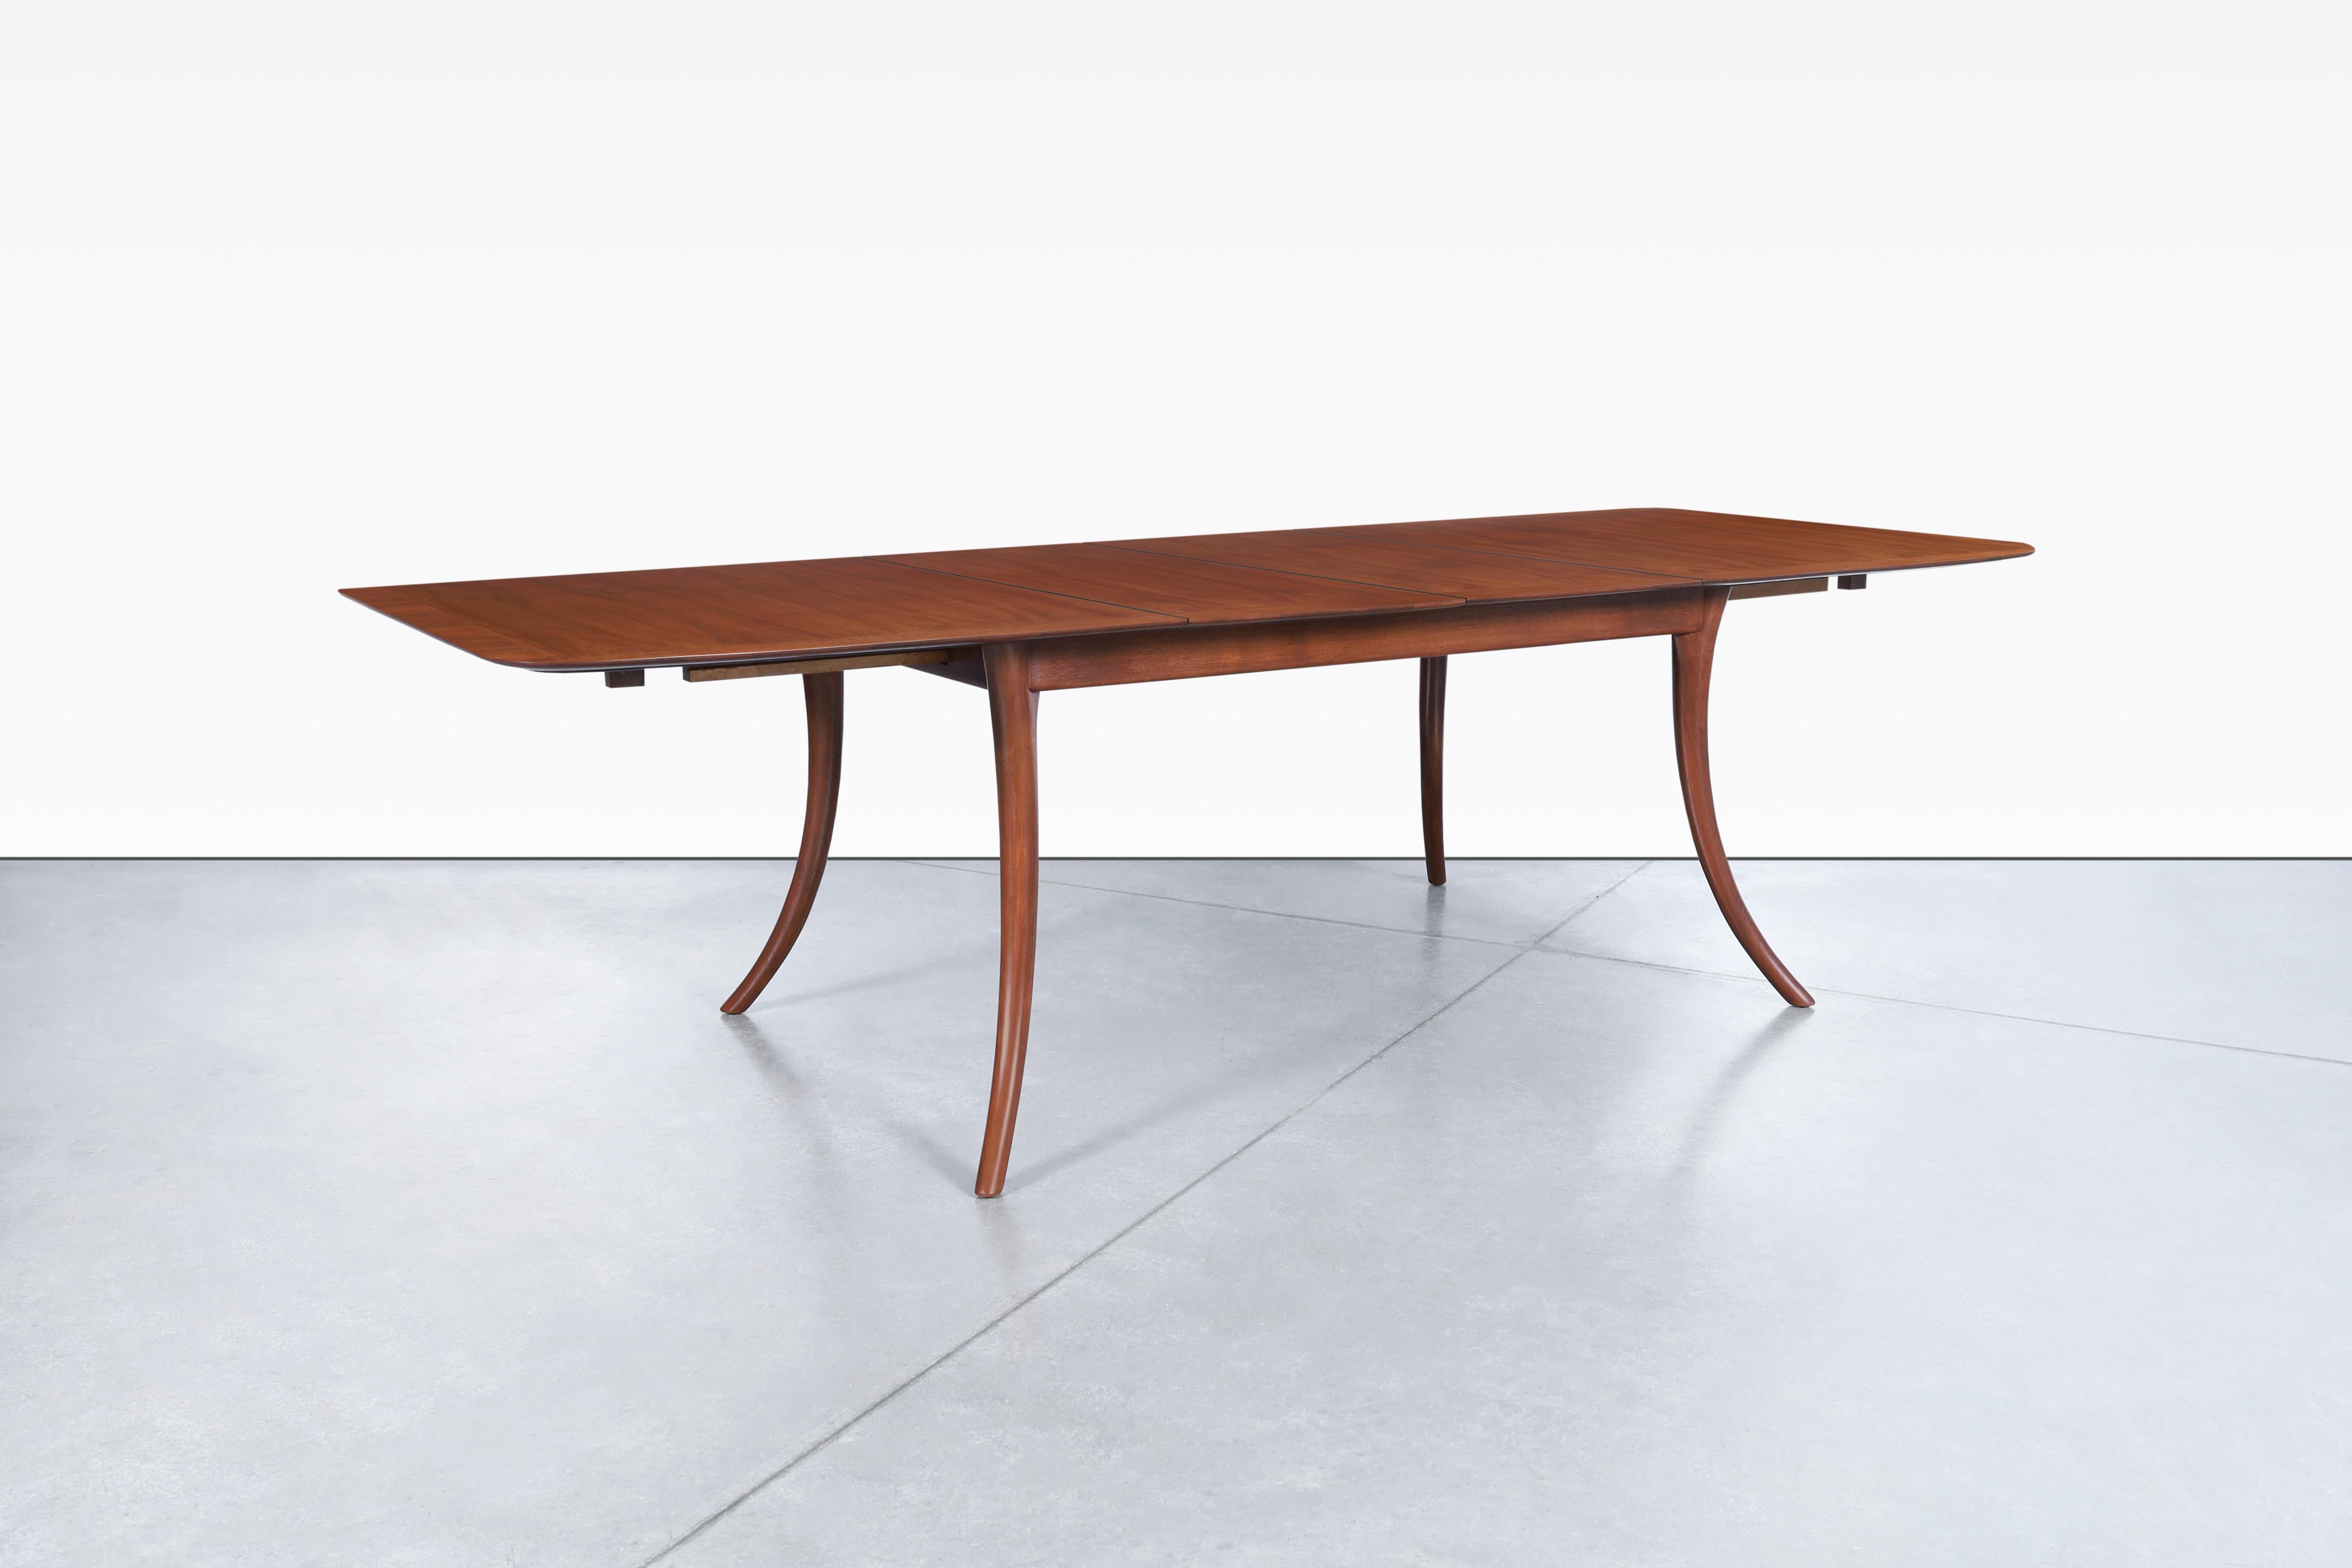 Stunning vintage dining table designed by T.H. Robsjohn-Gibbings for Widdicomb in the United States, circa 1950s. Indulge in the ultimate dining experience with our rare and unique mahogany dining table, also known as model 4301. This stunning piece